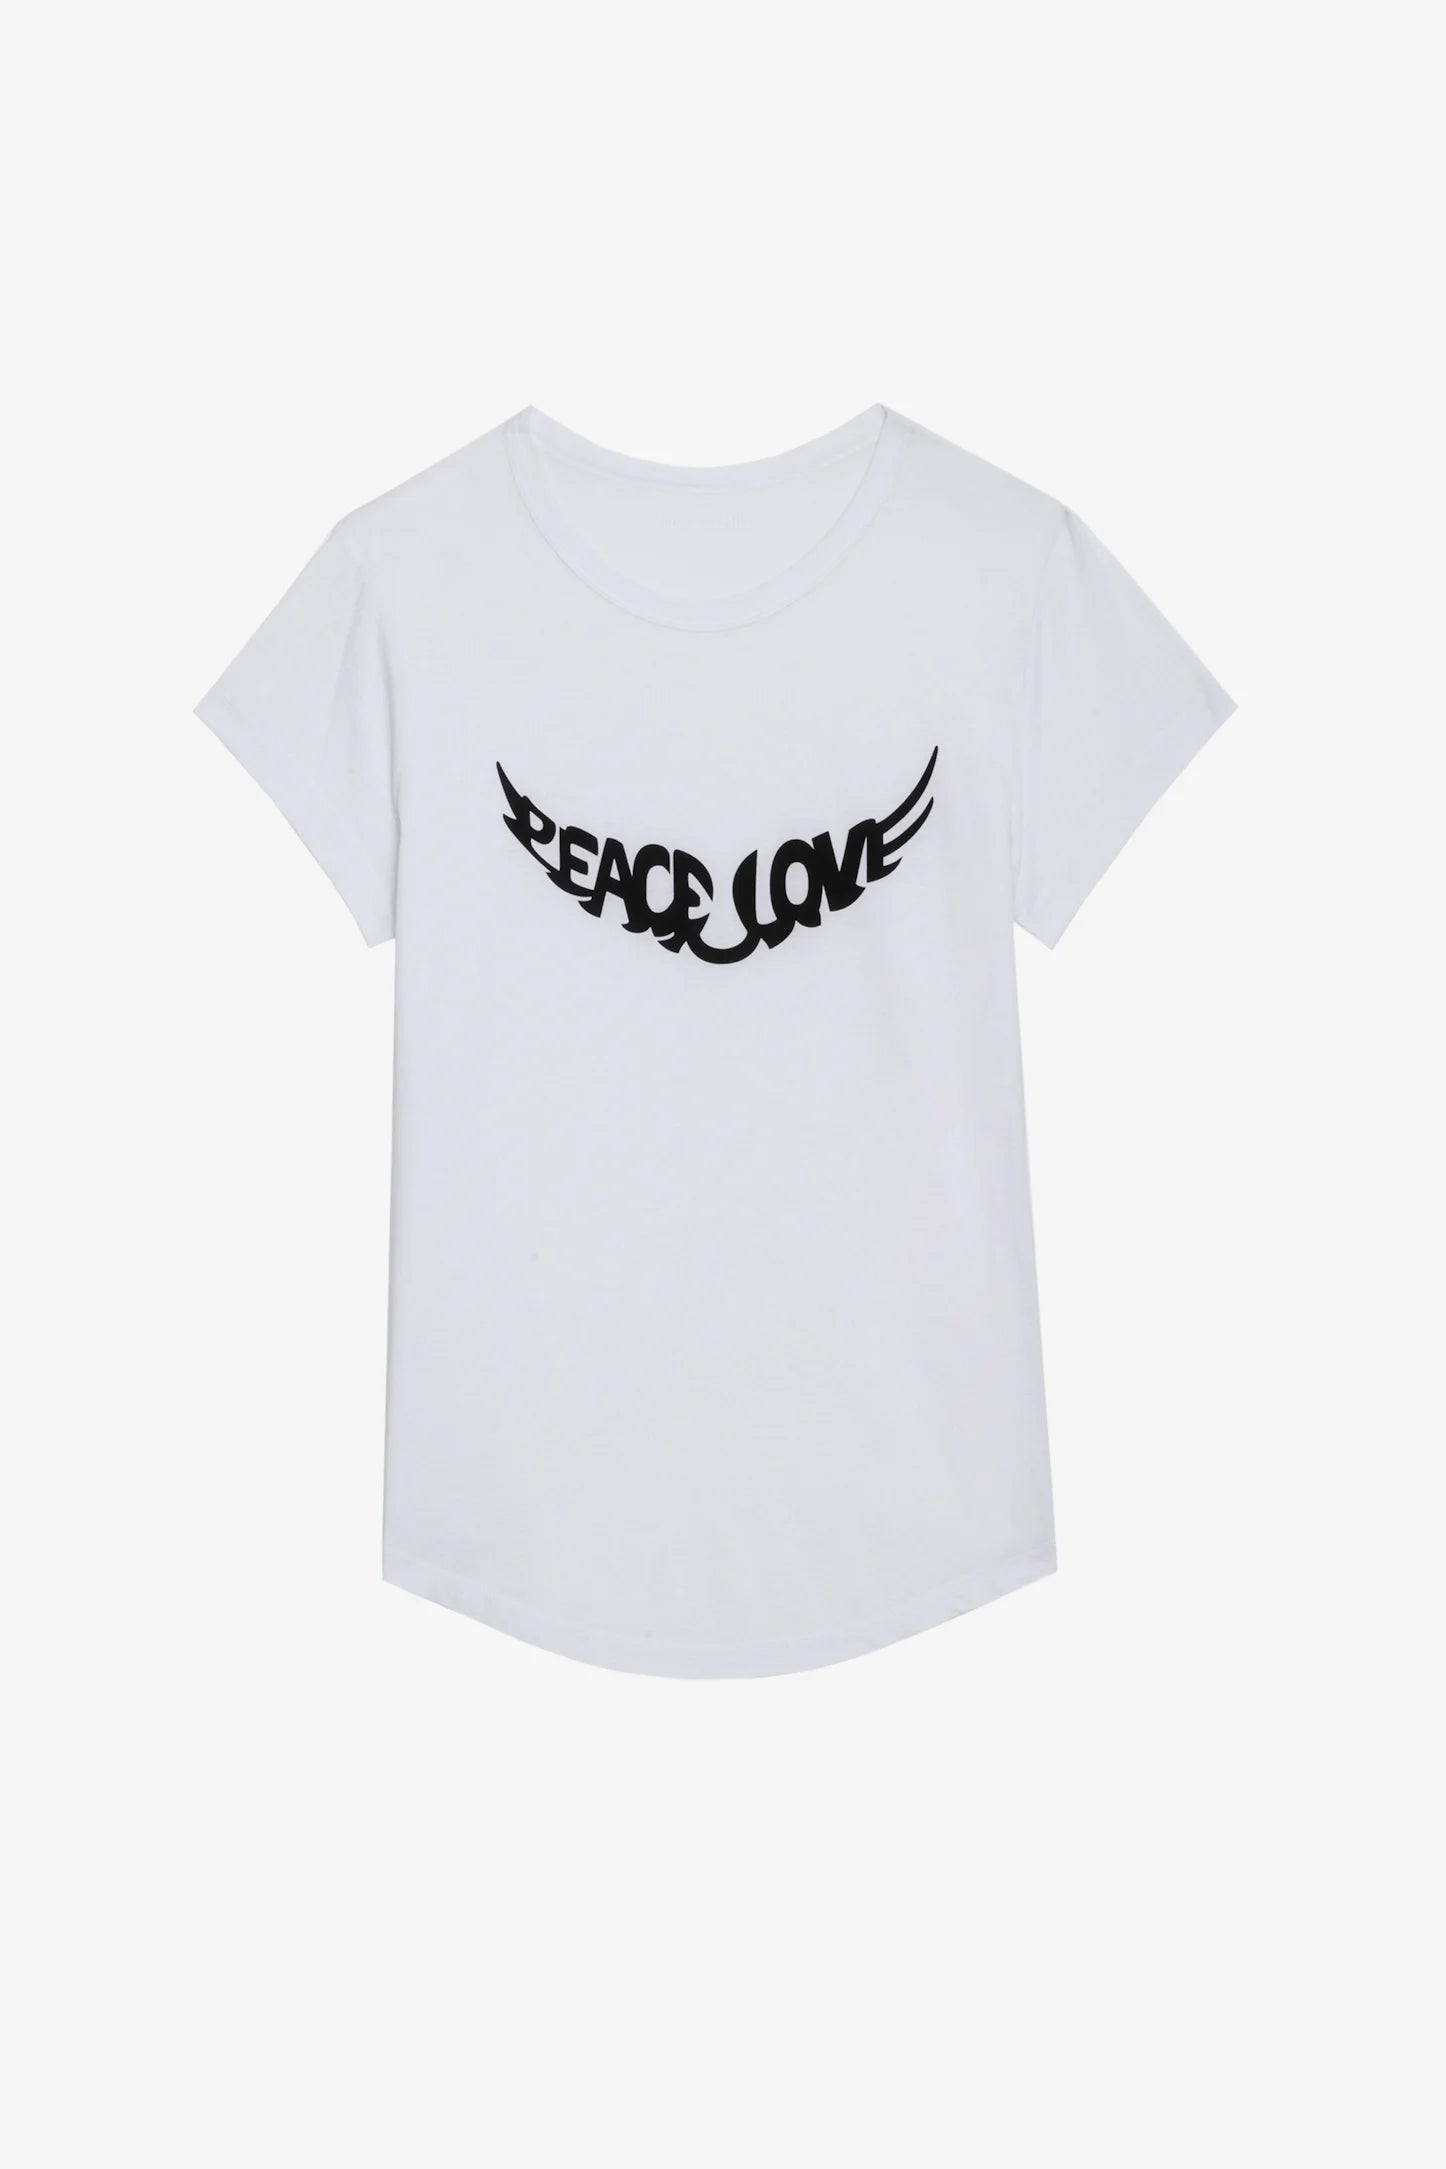 Zadig & Voltaire T-Shirt Woop Peace & Love Wings